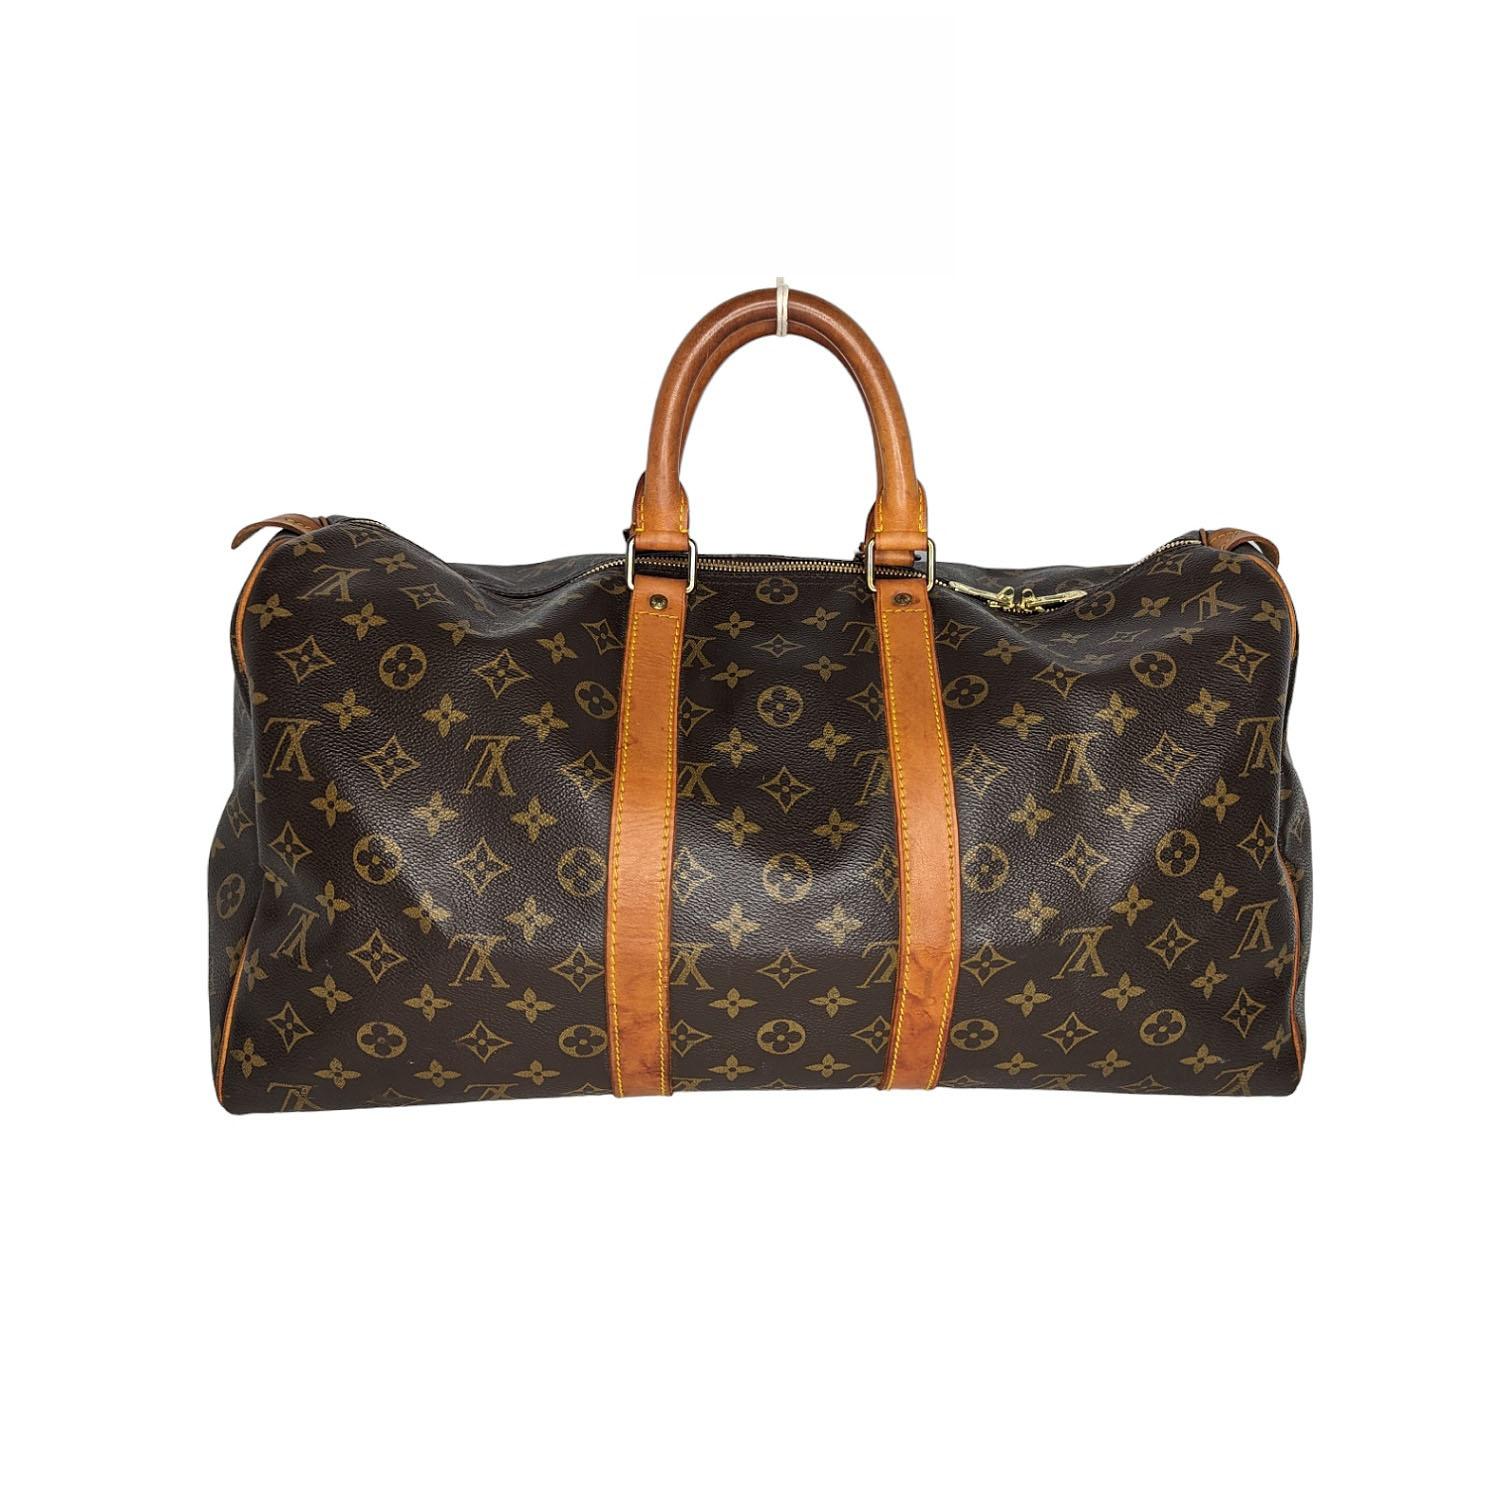 Lightweight and roomy, the Louis Vuitton Keepall Bandoulière 45 is the only way to travel in style. Its timeless shape and classic Monogram canvas are as fresh today as they ever have been. Retail $2,440.

Designer: Louis Vuitton
Material: Monogram